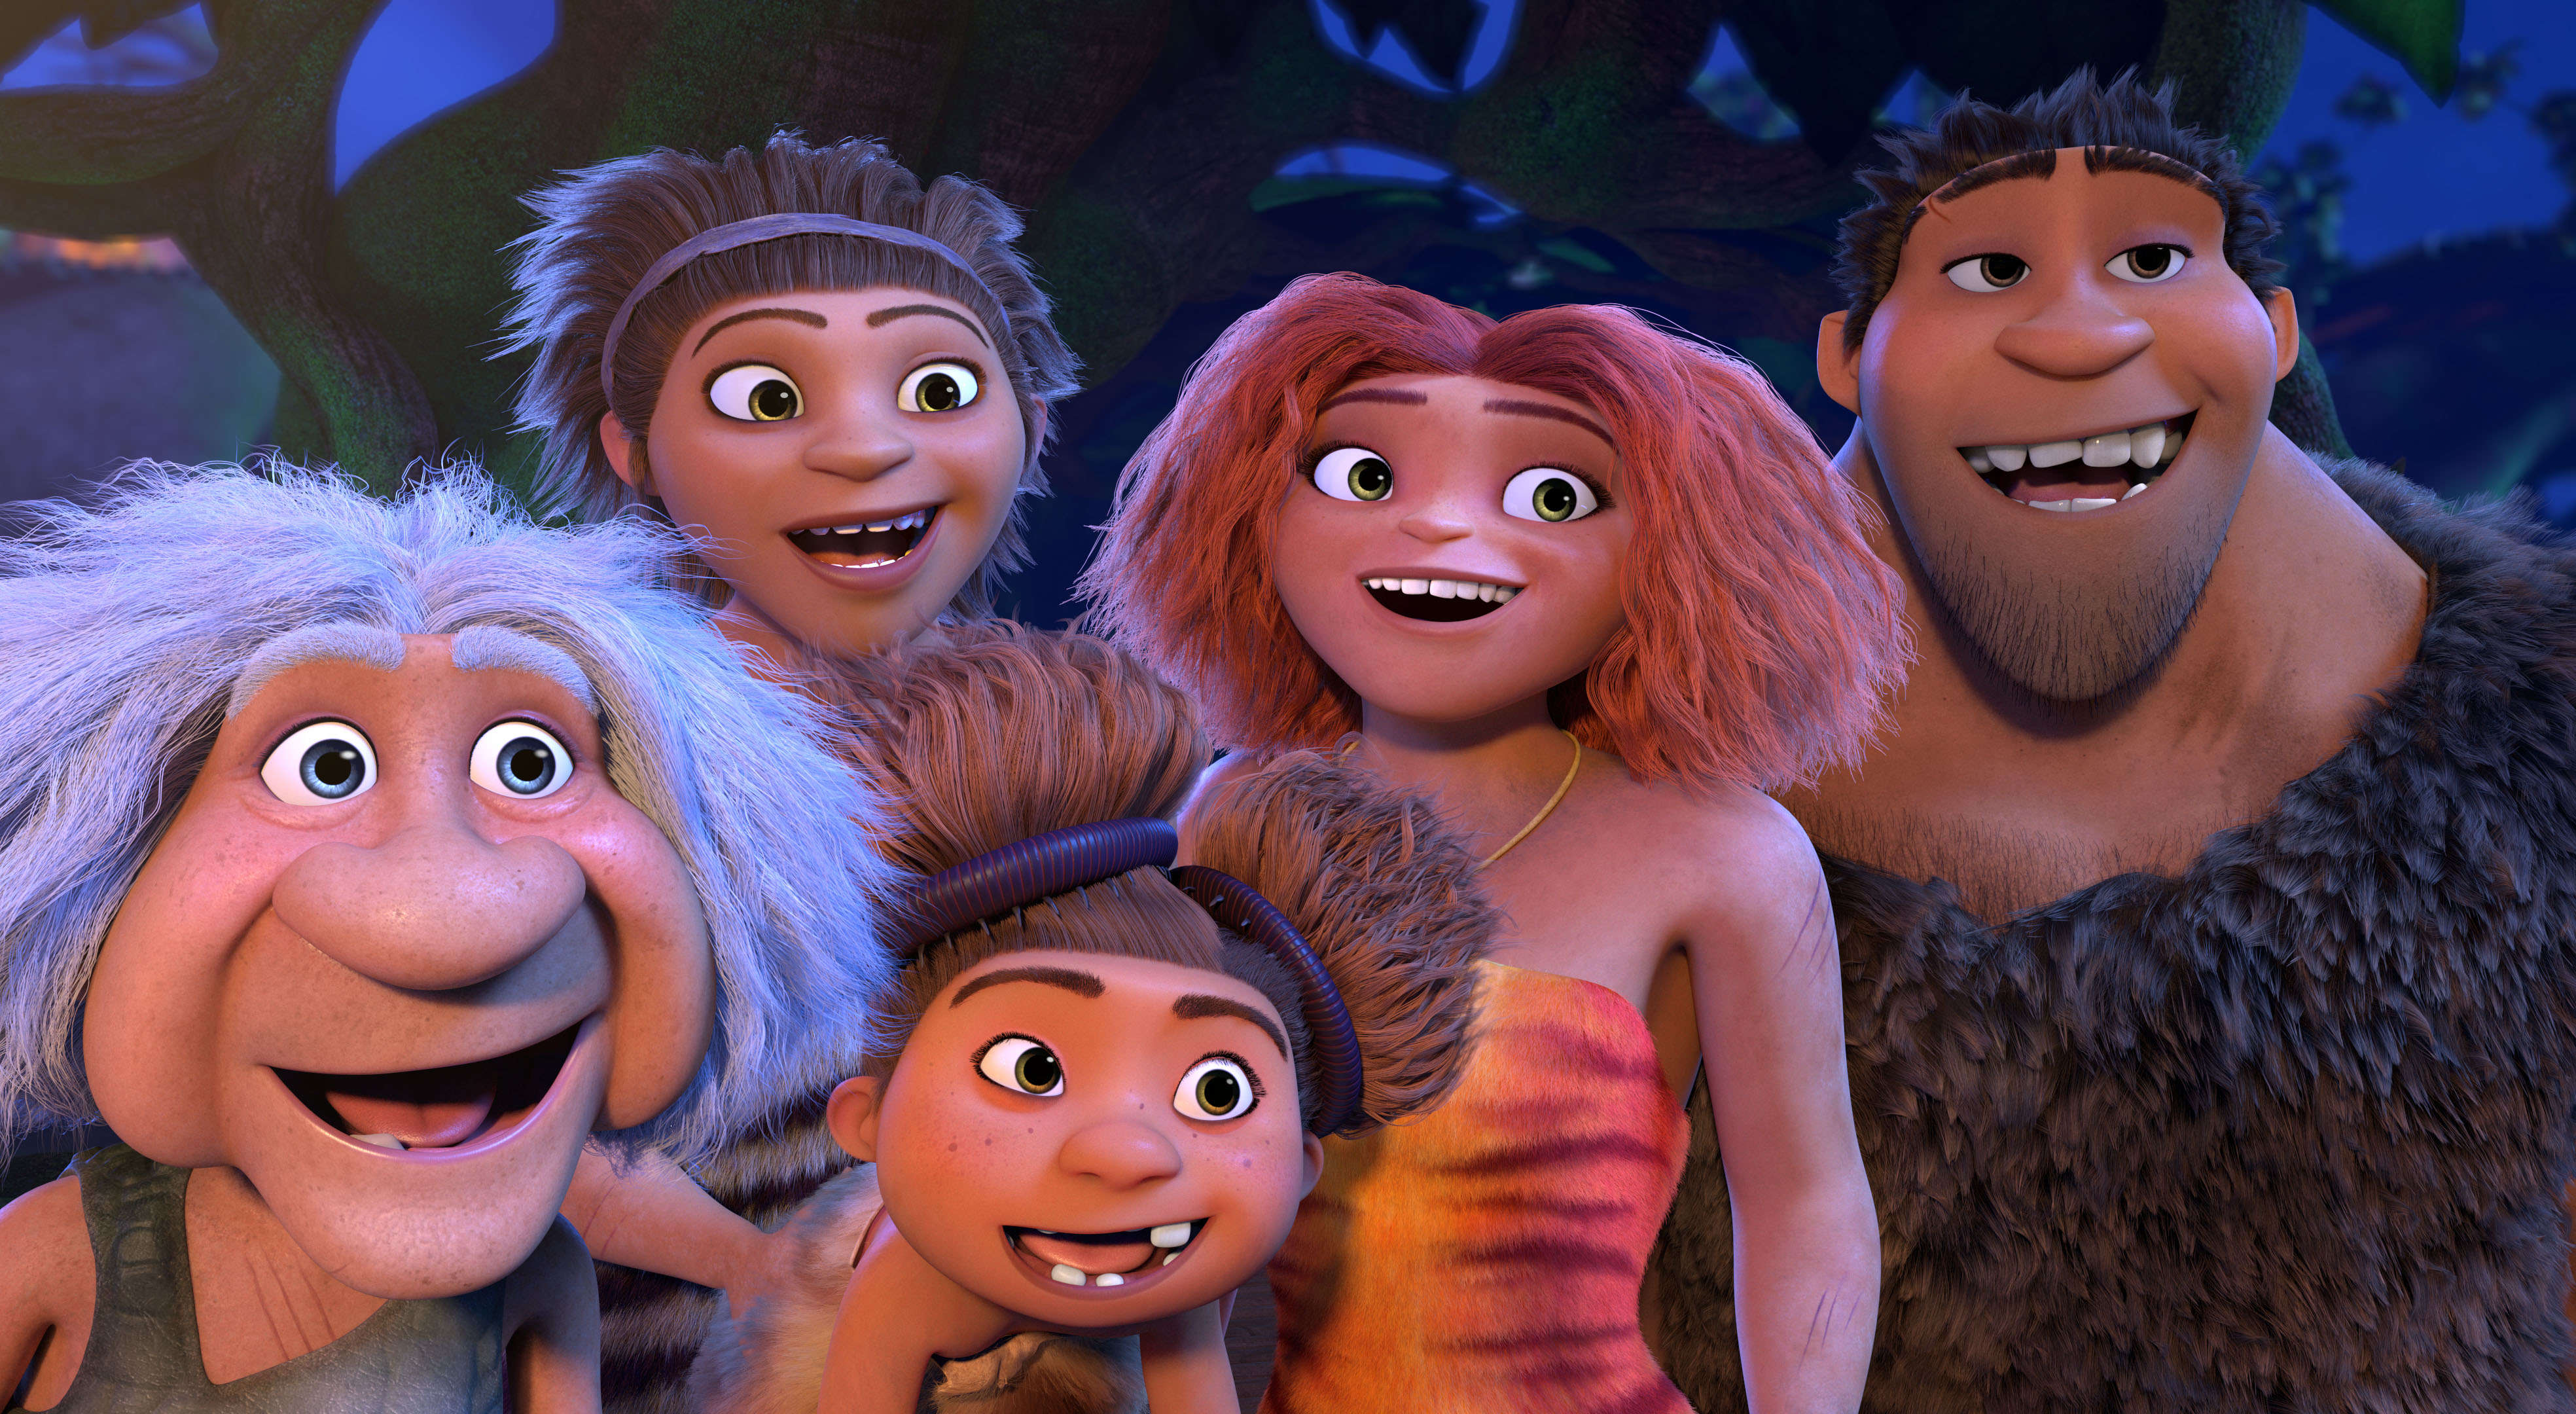 The Croods Family Tree